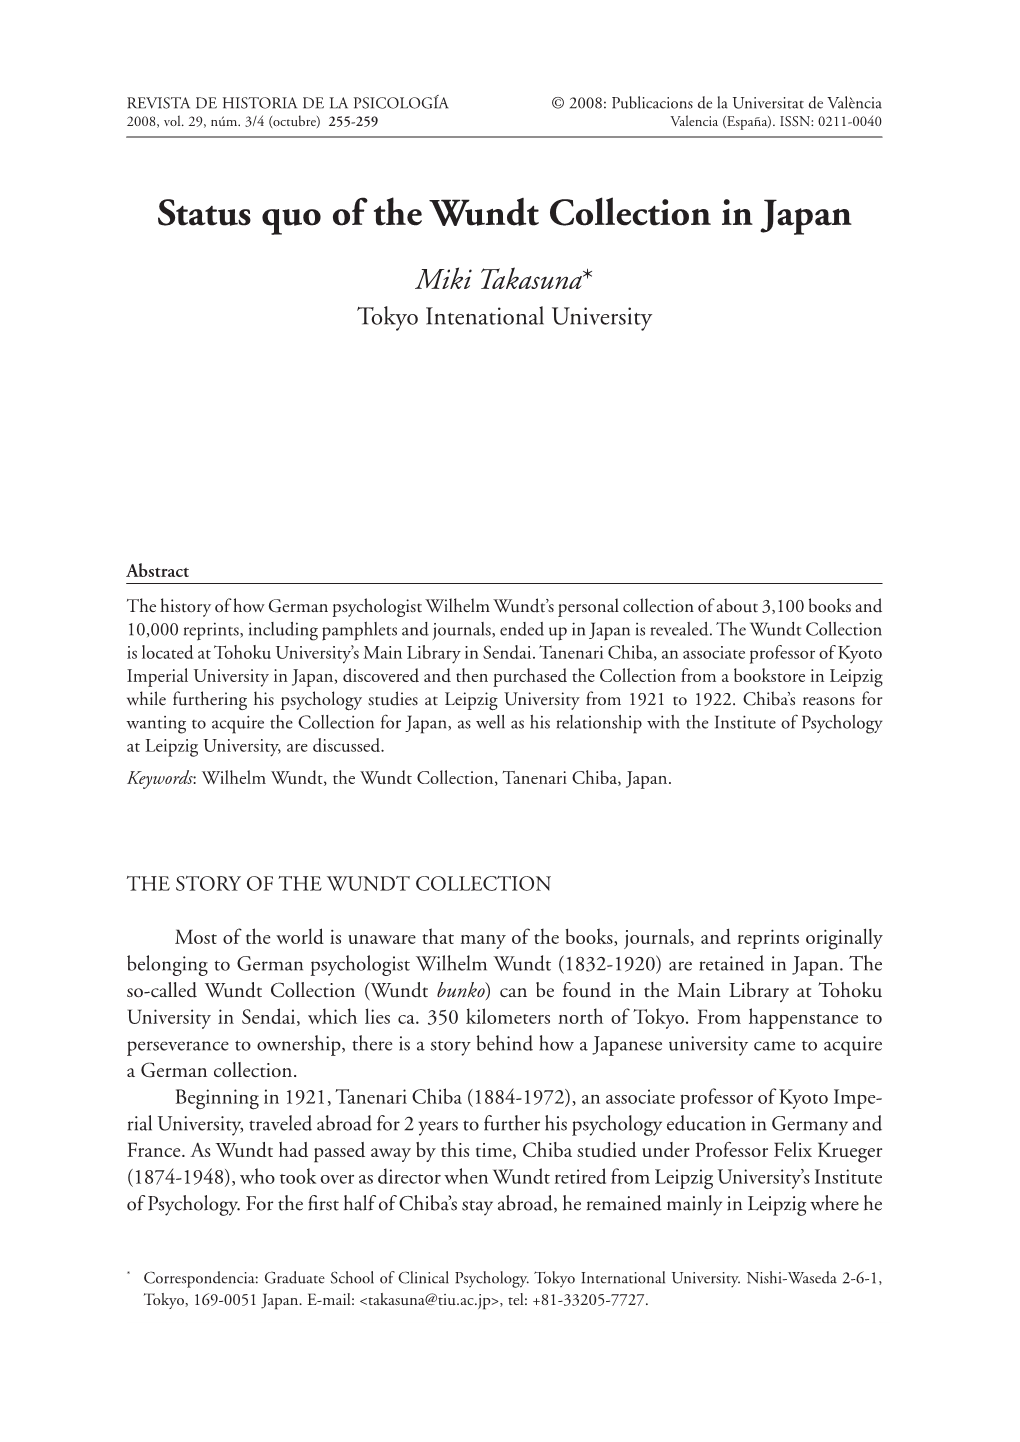 Status Quo of the Wundt Collection in Japan